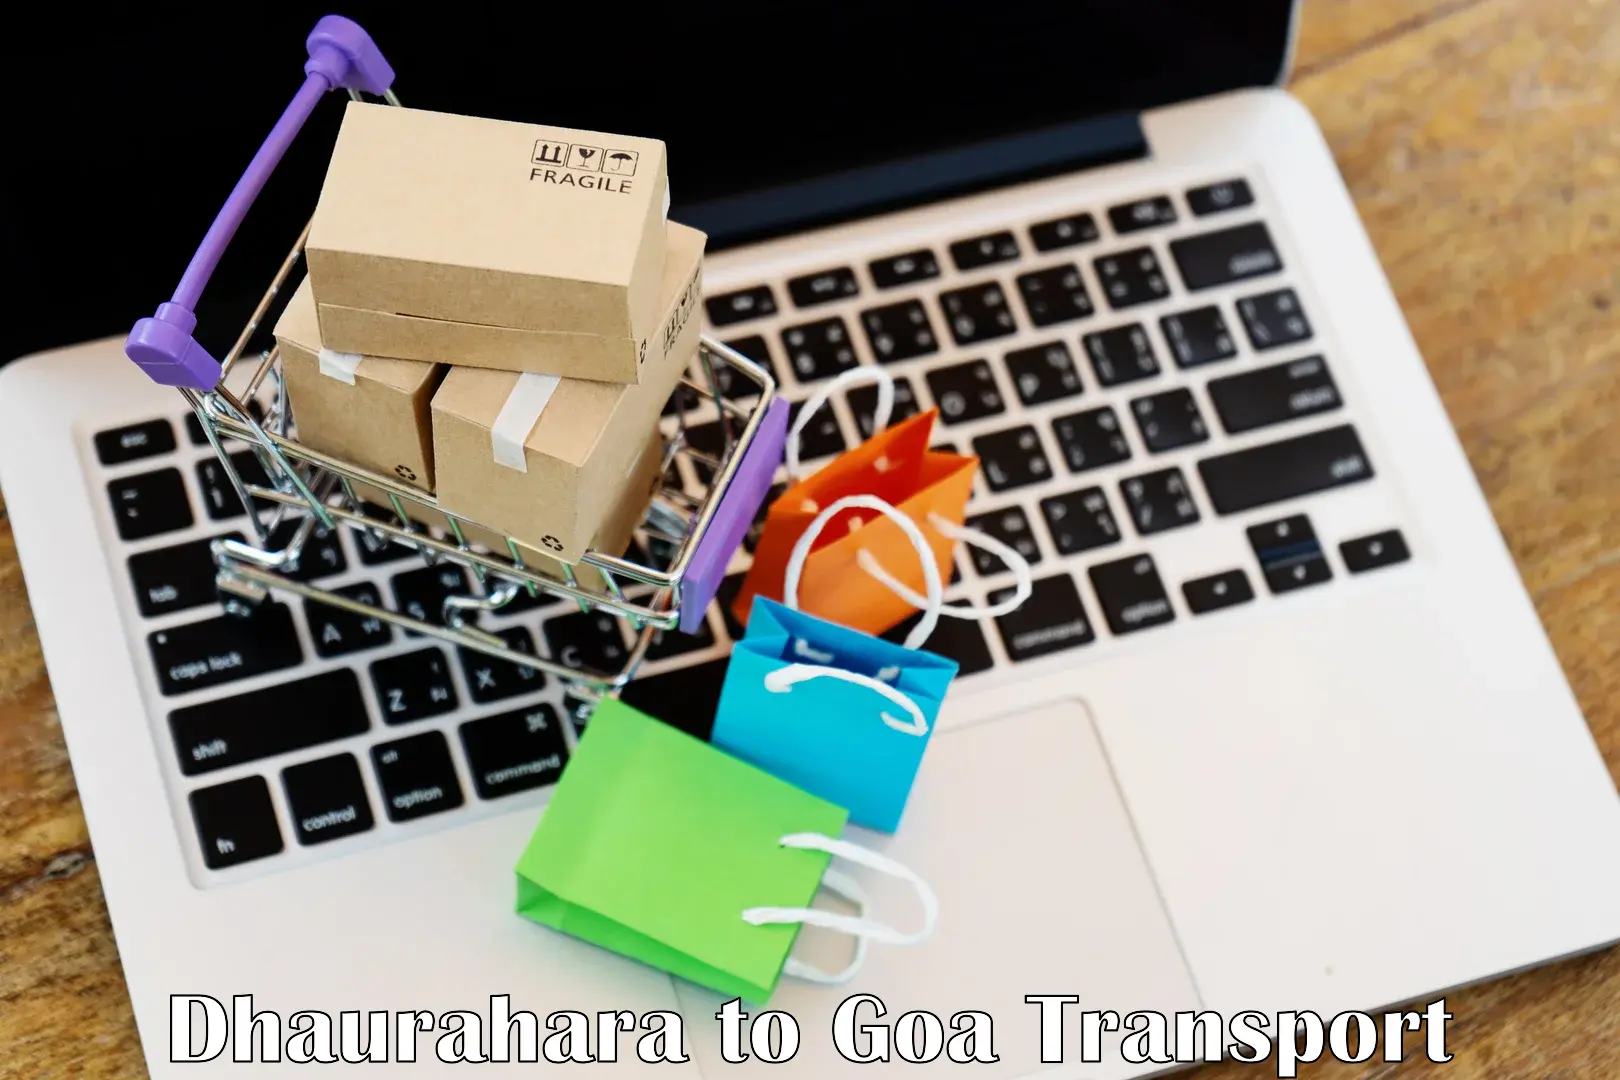 Delivery service Dhaurahara to South Goa